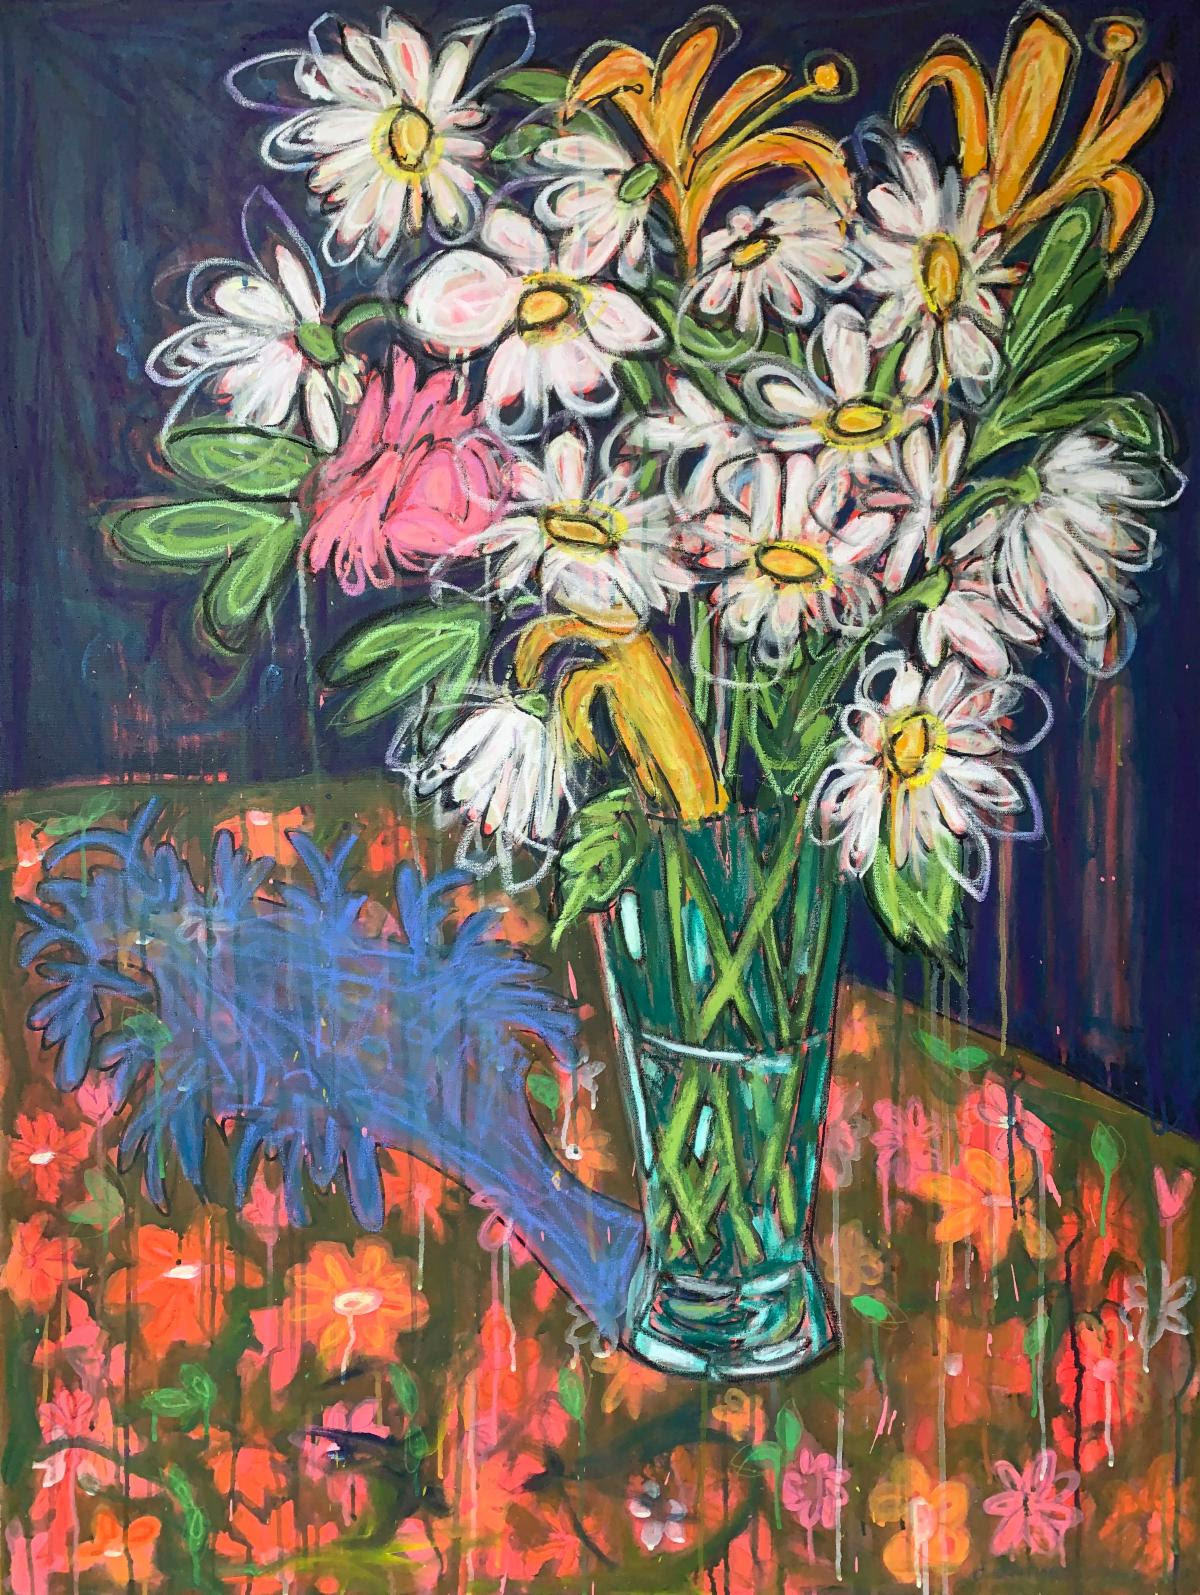 Carlos Santiago, Lovely Bouquet, acrylic, oil pastel, and color pencil on canvas